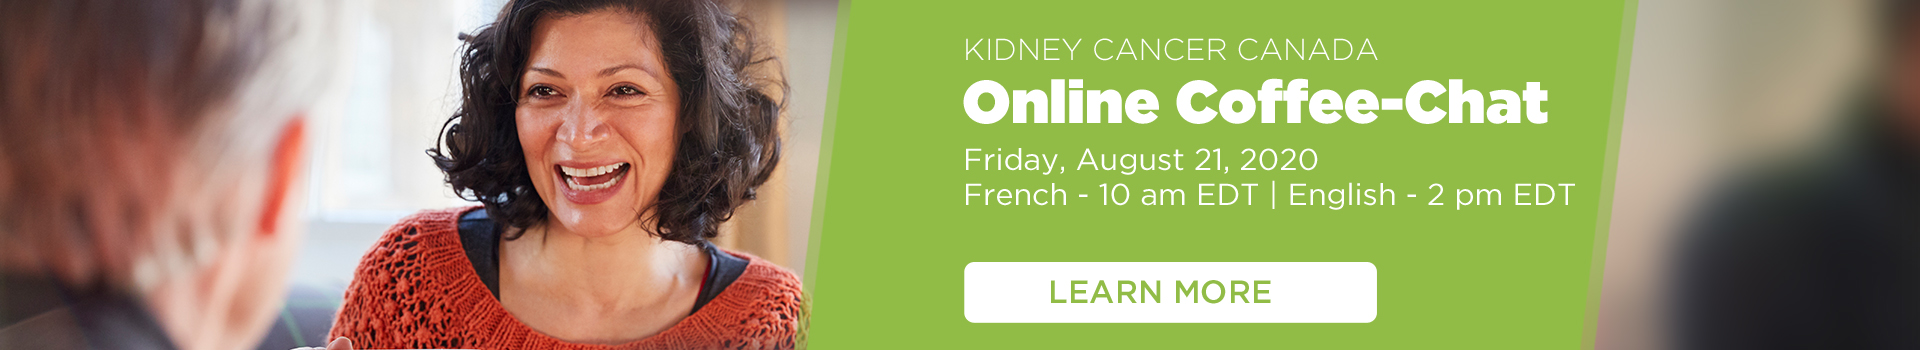 Kidney Cancer Canada - Online Coffee Chat